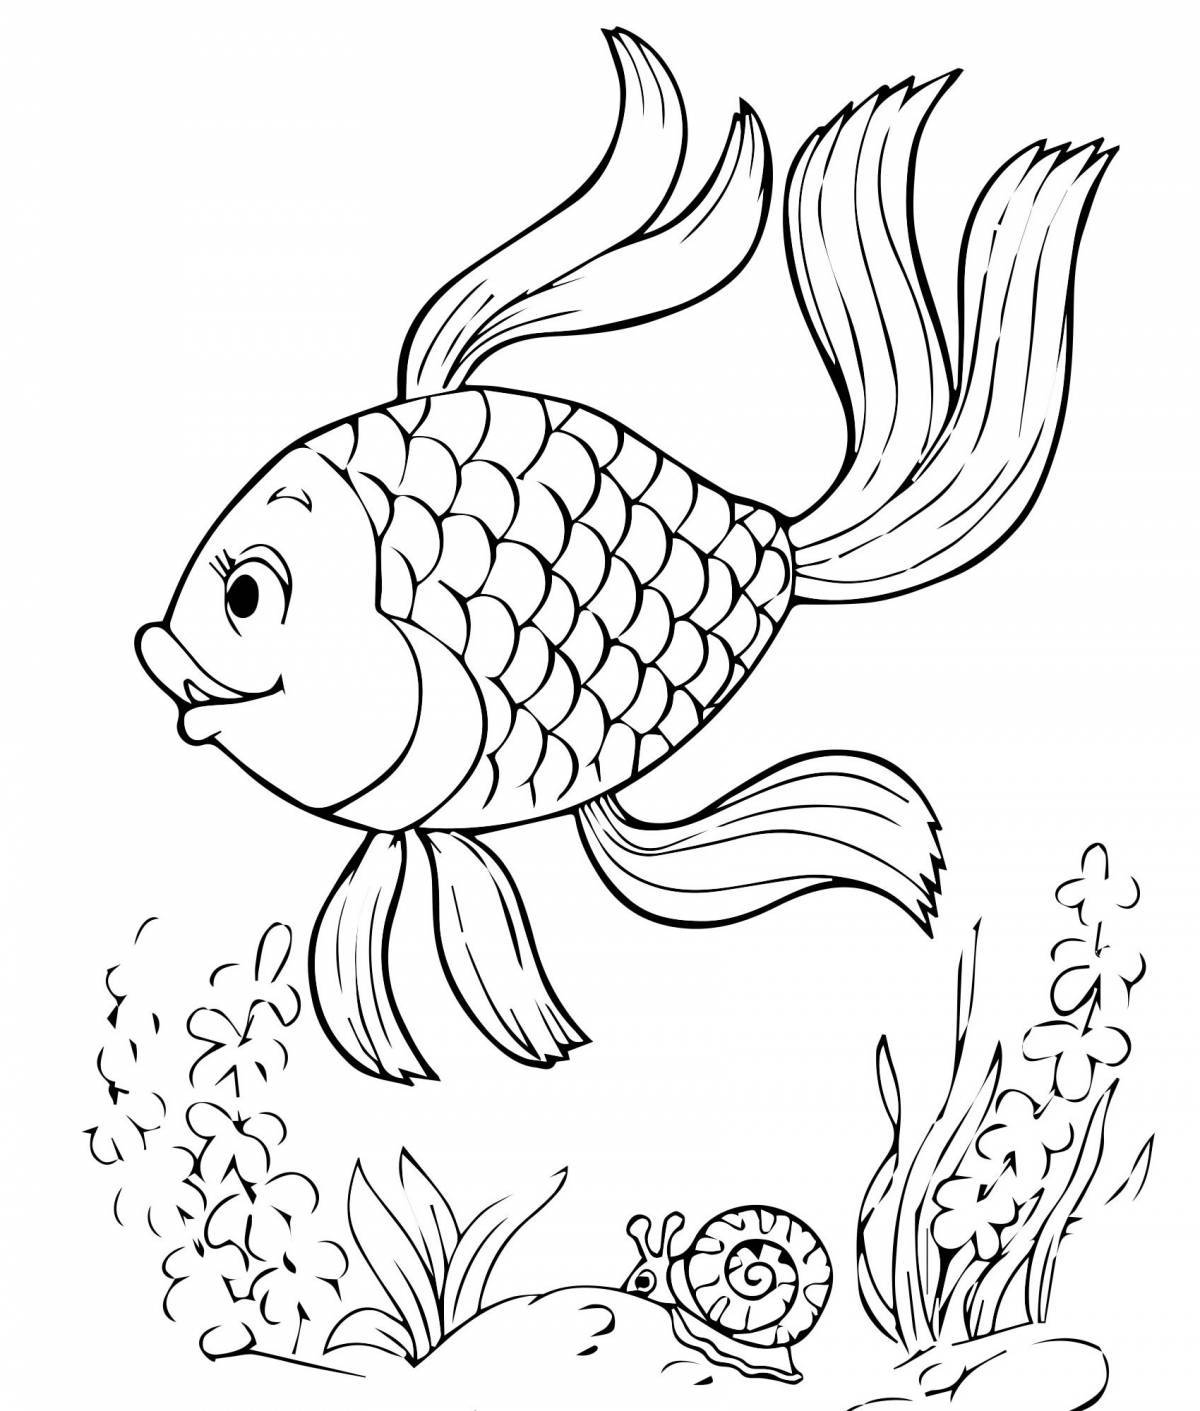 Animated goldfish coloring page for kids